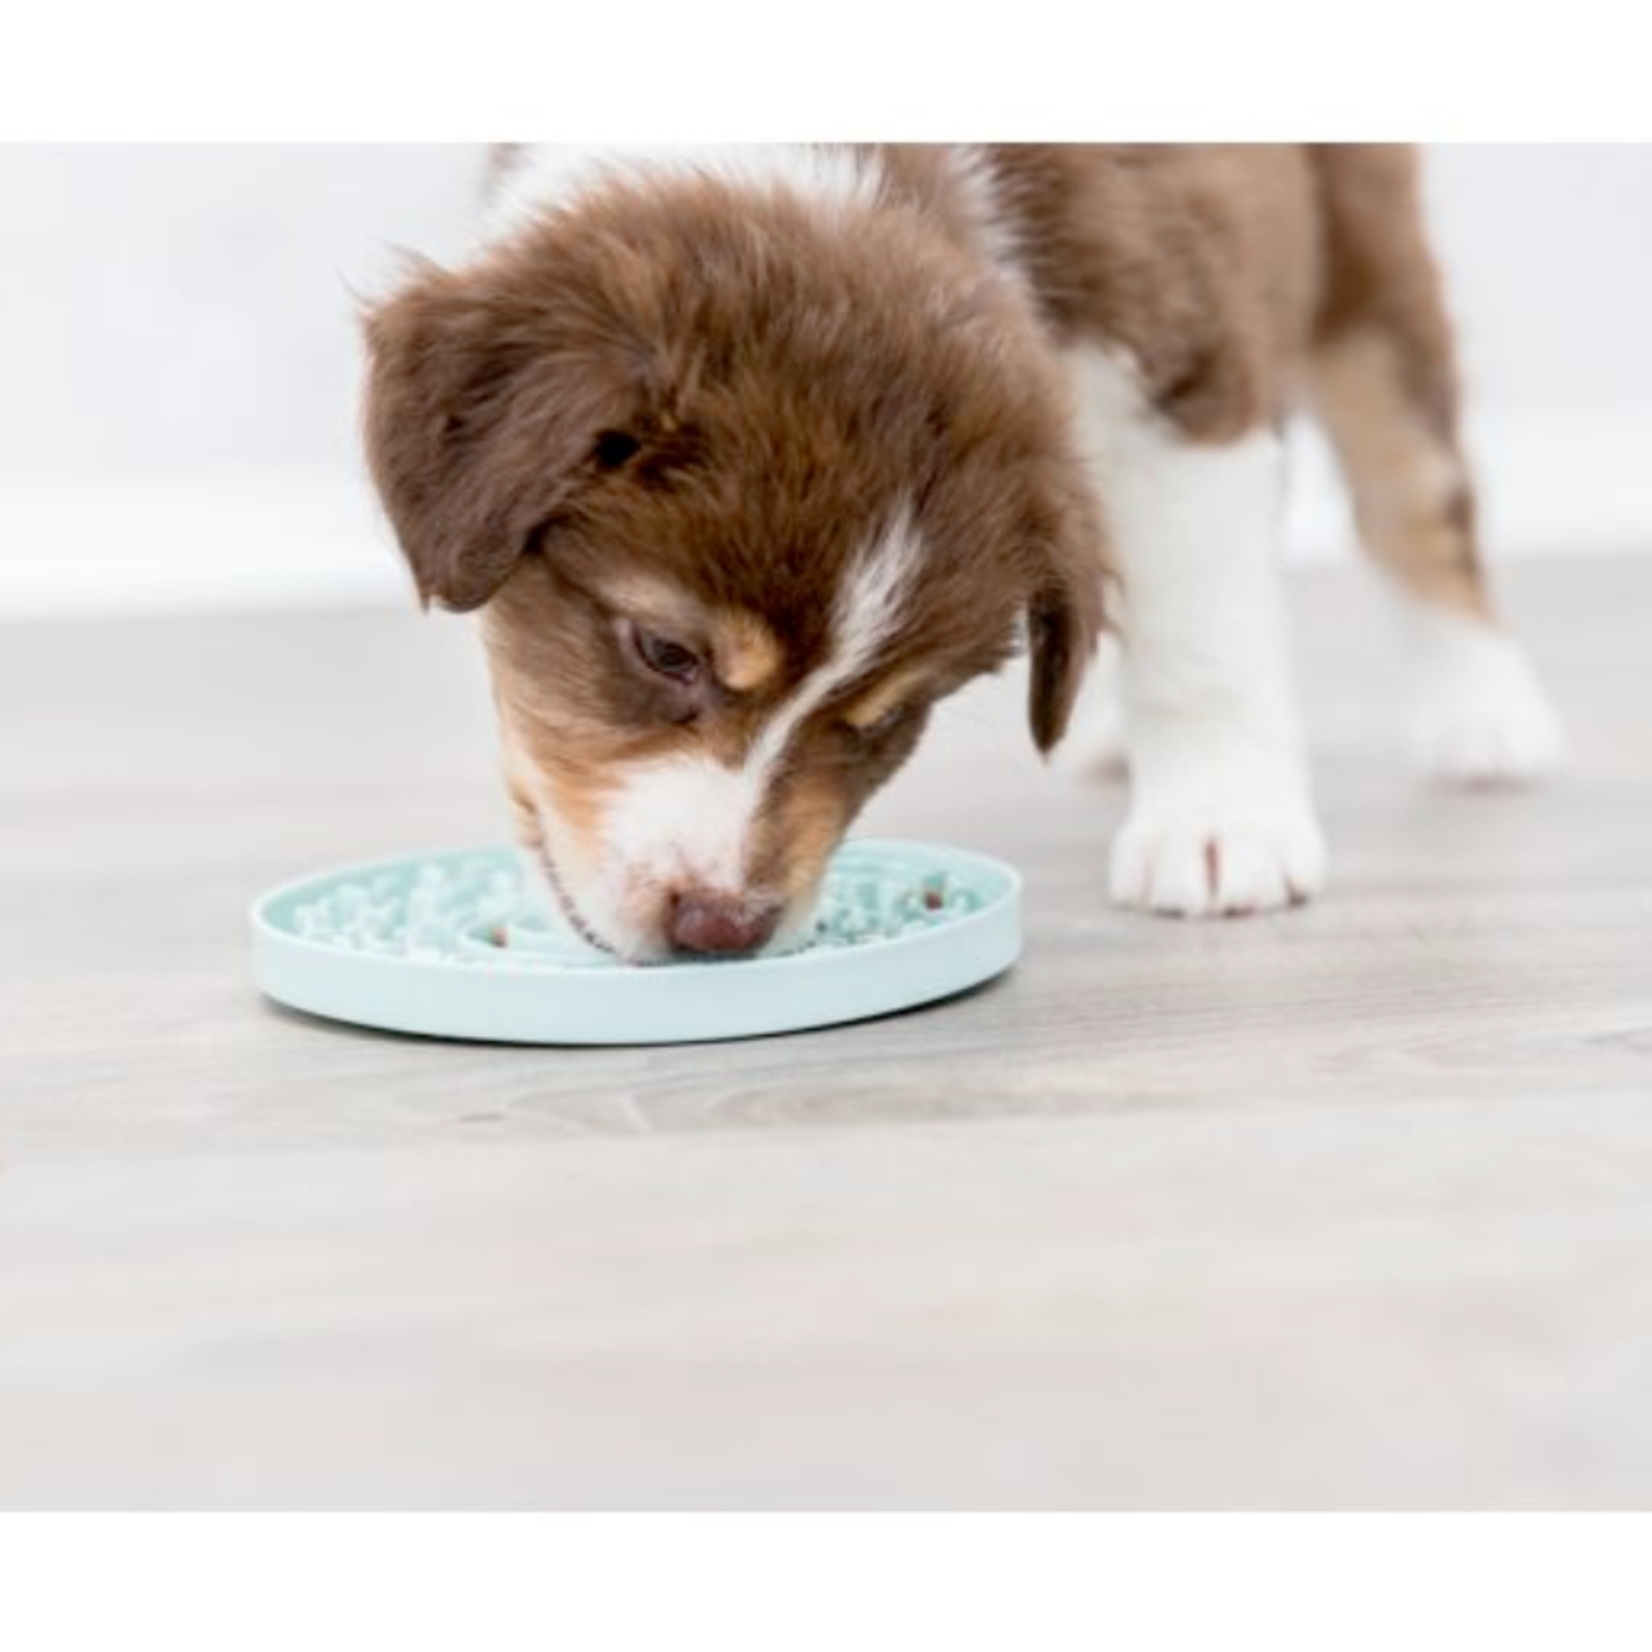 Trixie Junior Licking Plate - Trixie